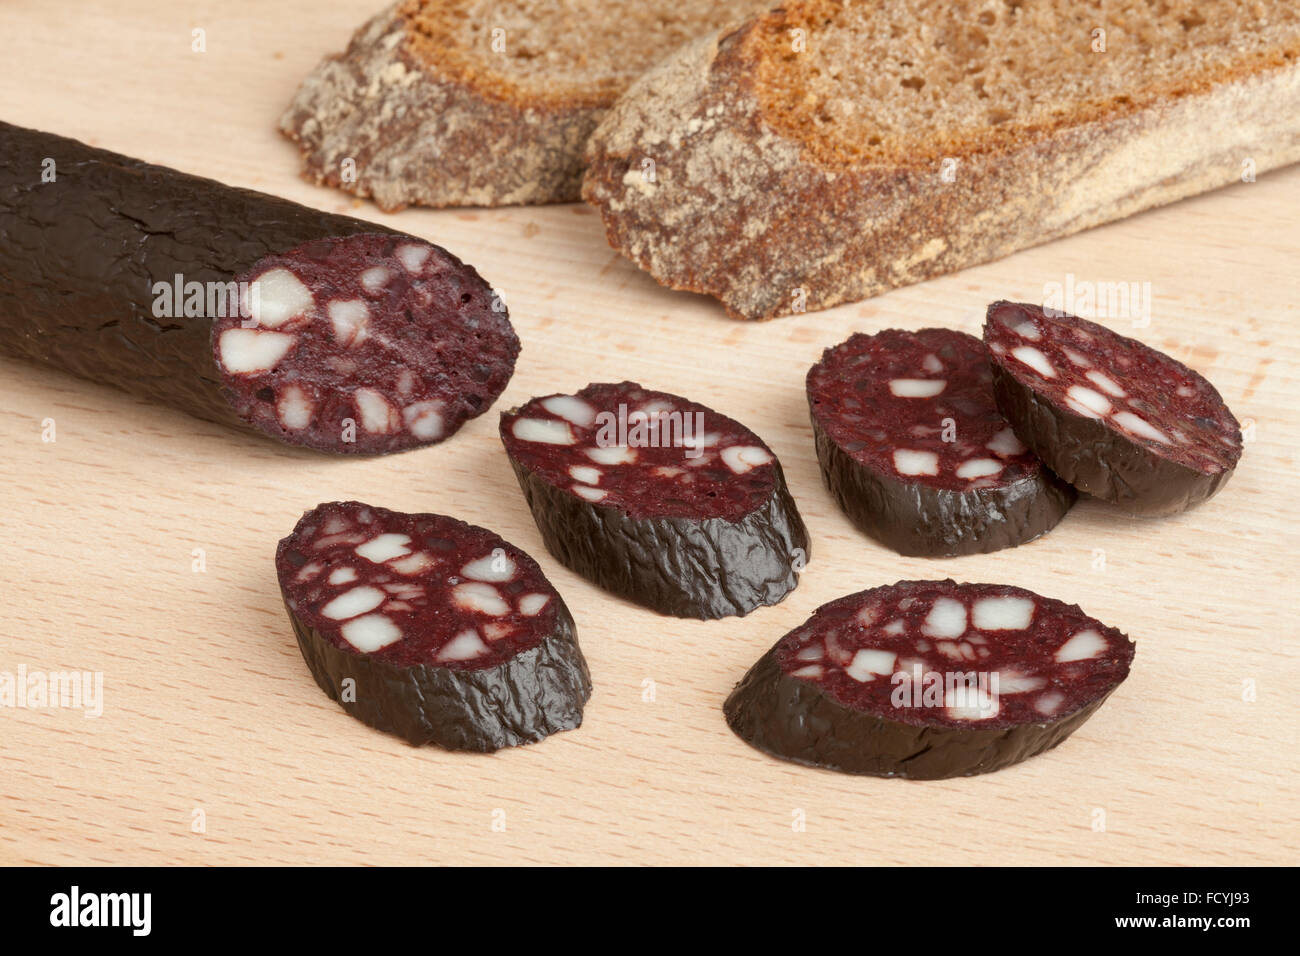 Traditional German black pudding sausage and slices Stock Photo